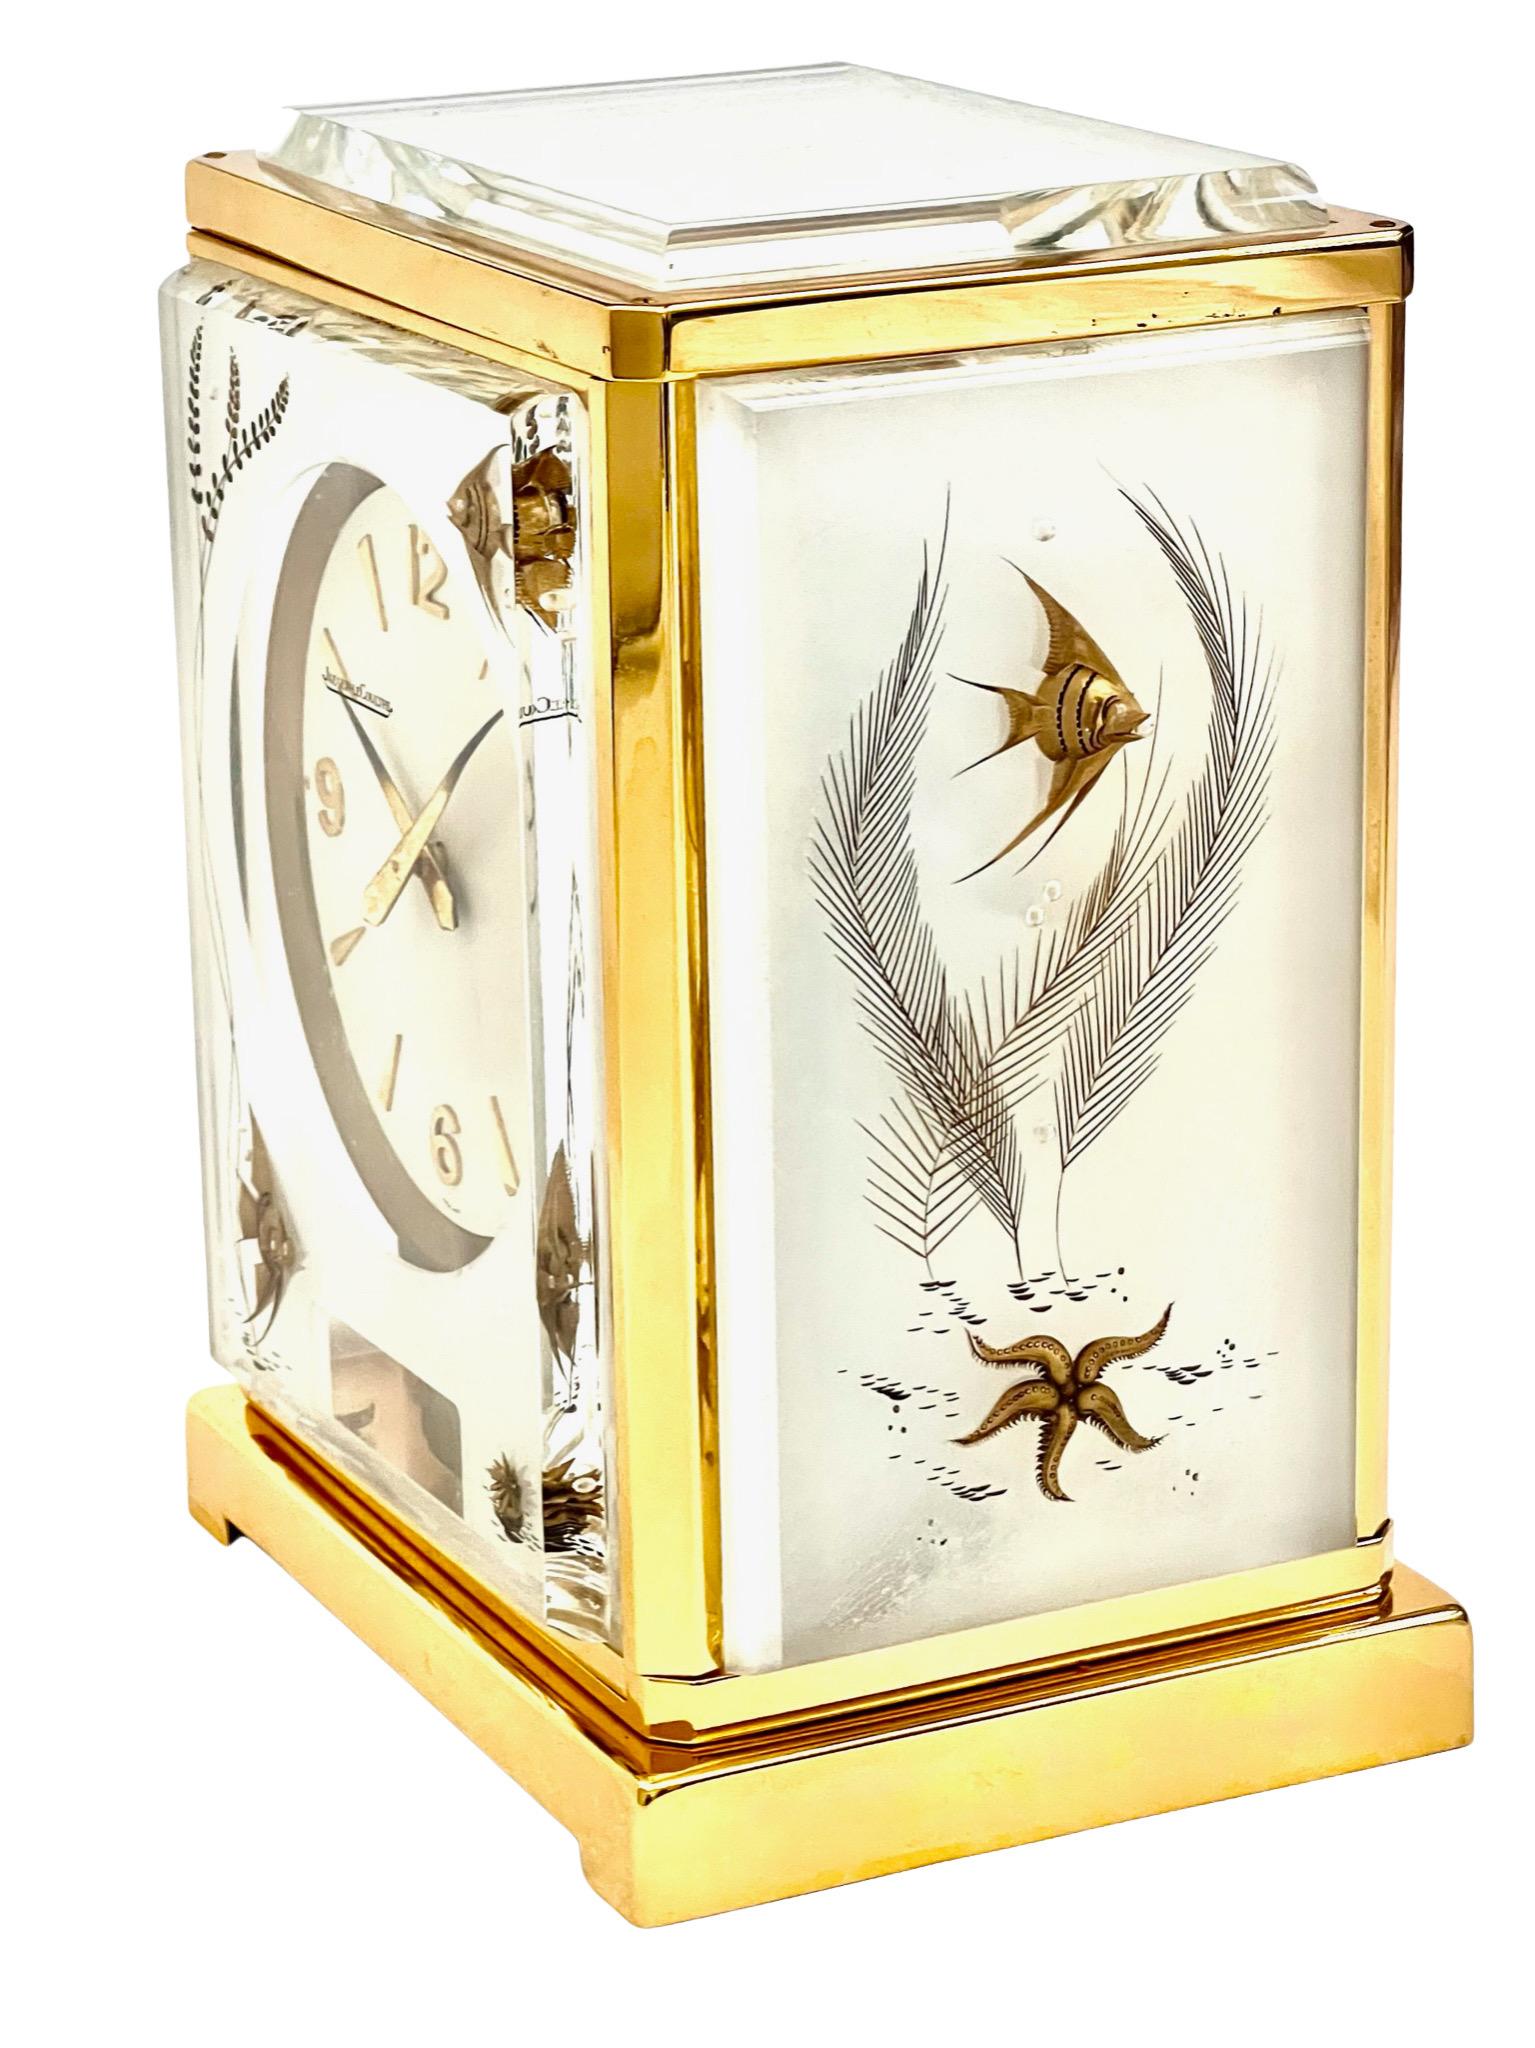 A stunning Jaeger LeCoultre mid-century Marina 'Poissons' Atmos clock with gilded fishes to the front and sides. This piece looks wonderful on a desk in a study, or on a mantelpiece or table.

The Atmos is a clock that has no external power source